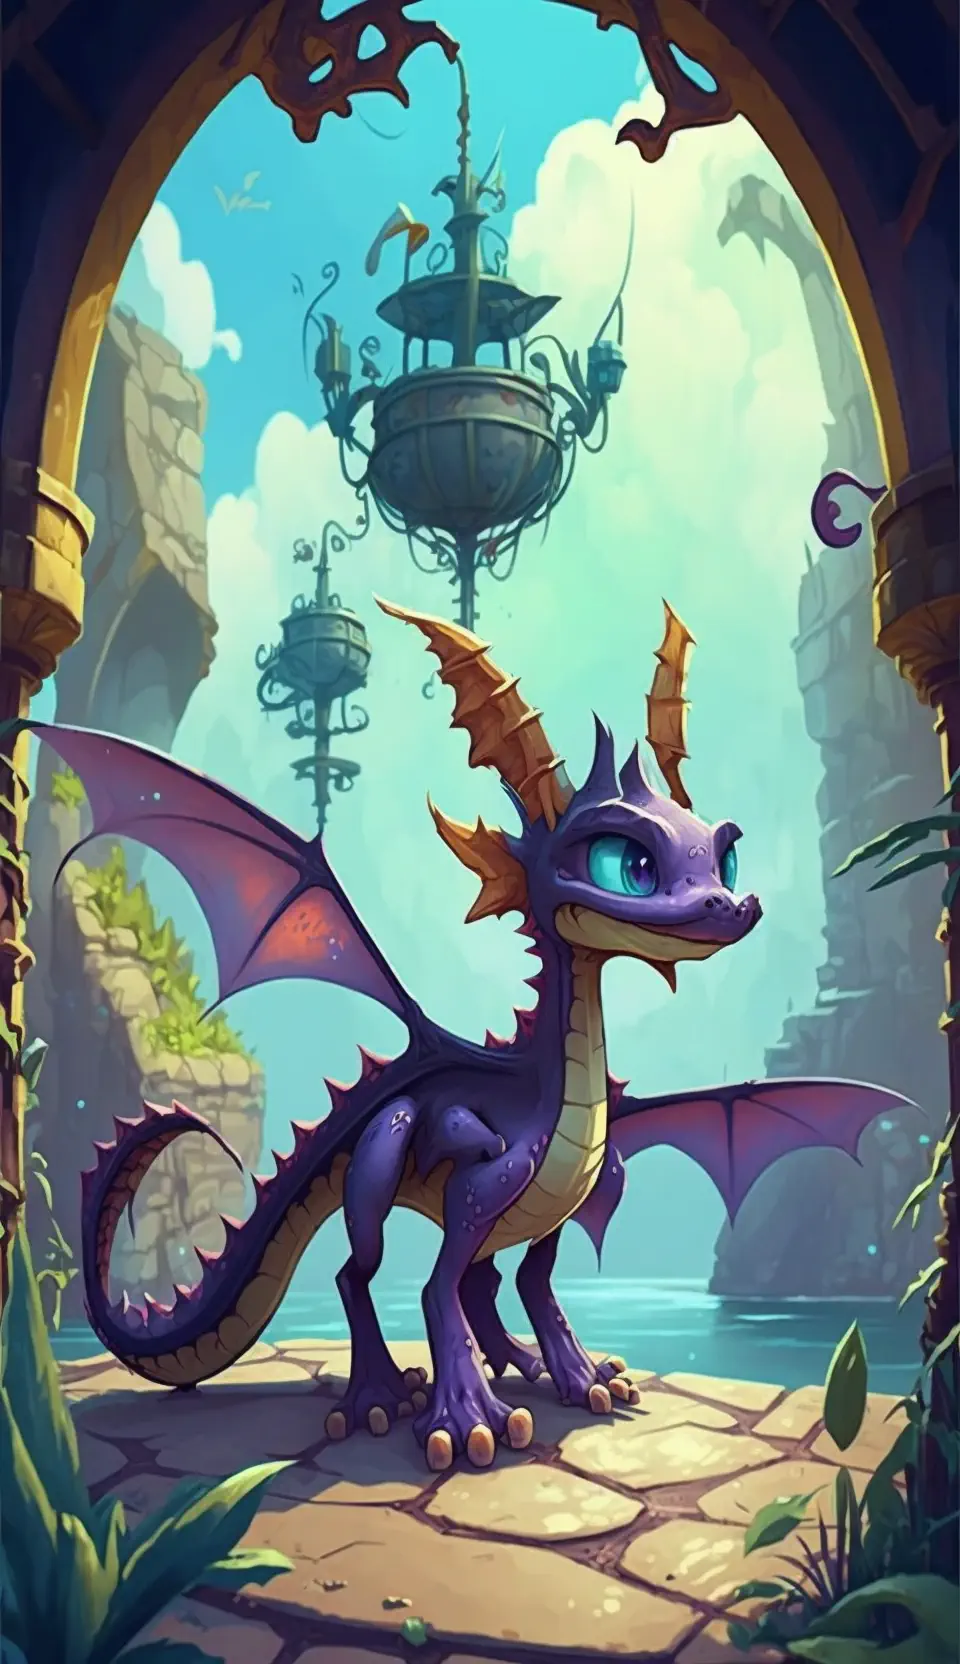 Drakon0_Spyro_the_dragon_with_spread_wings_and_aquarium_in_back_1dc02bbf-3aa1-4985-83f7-58cd9b27892a